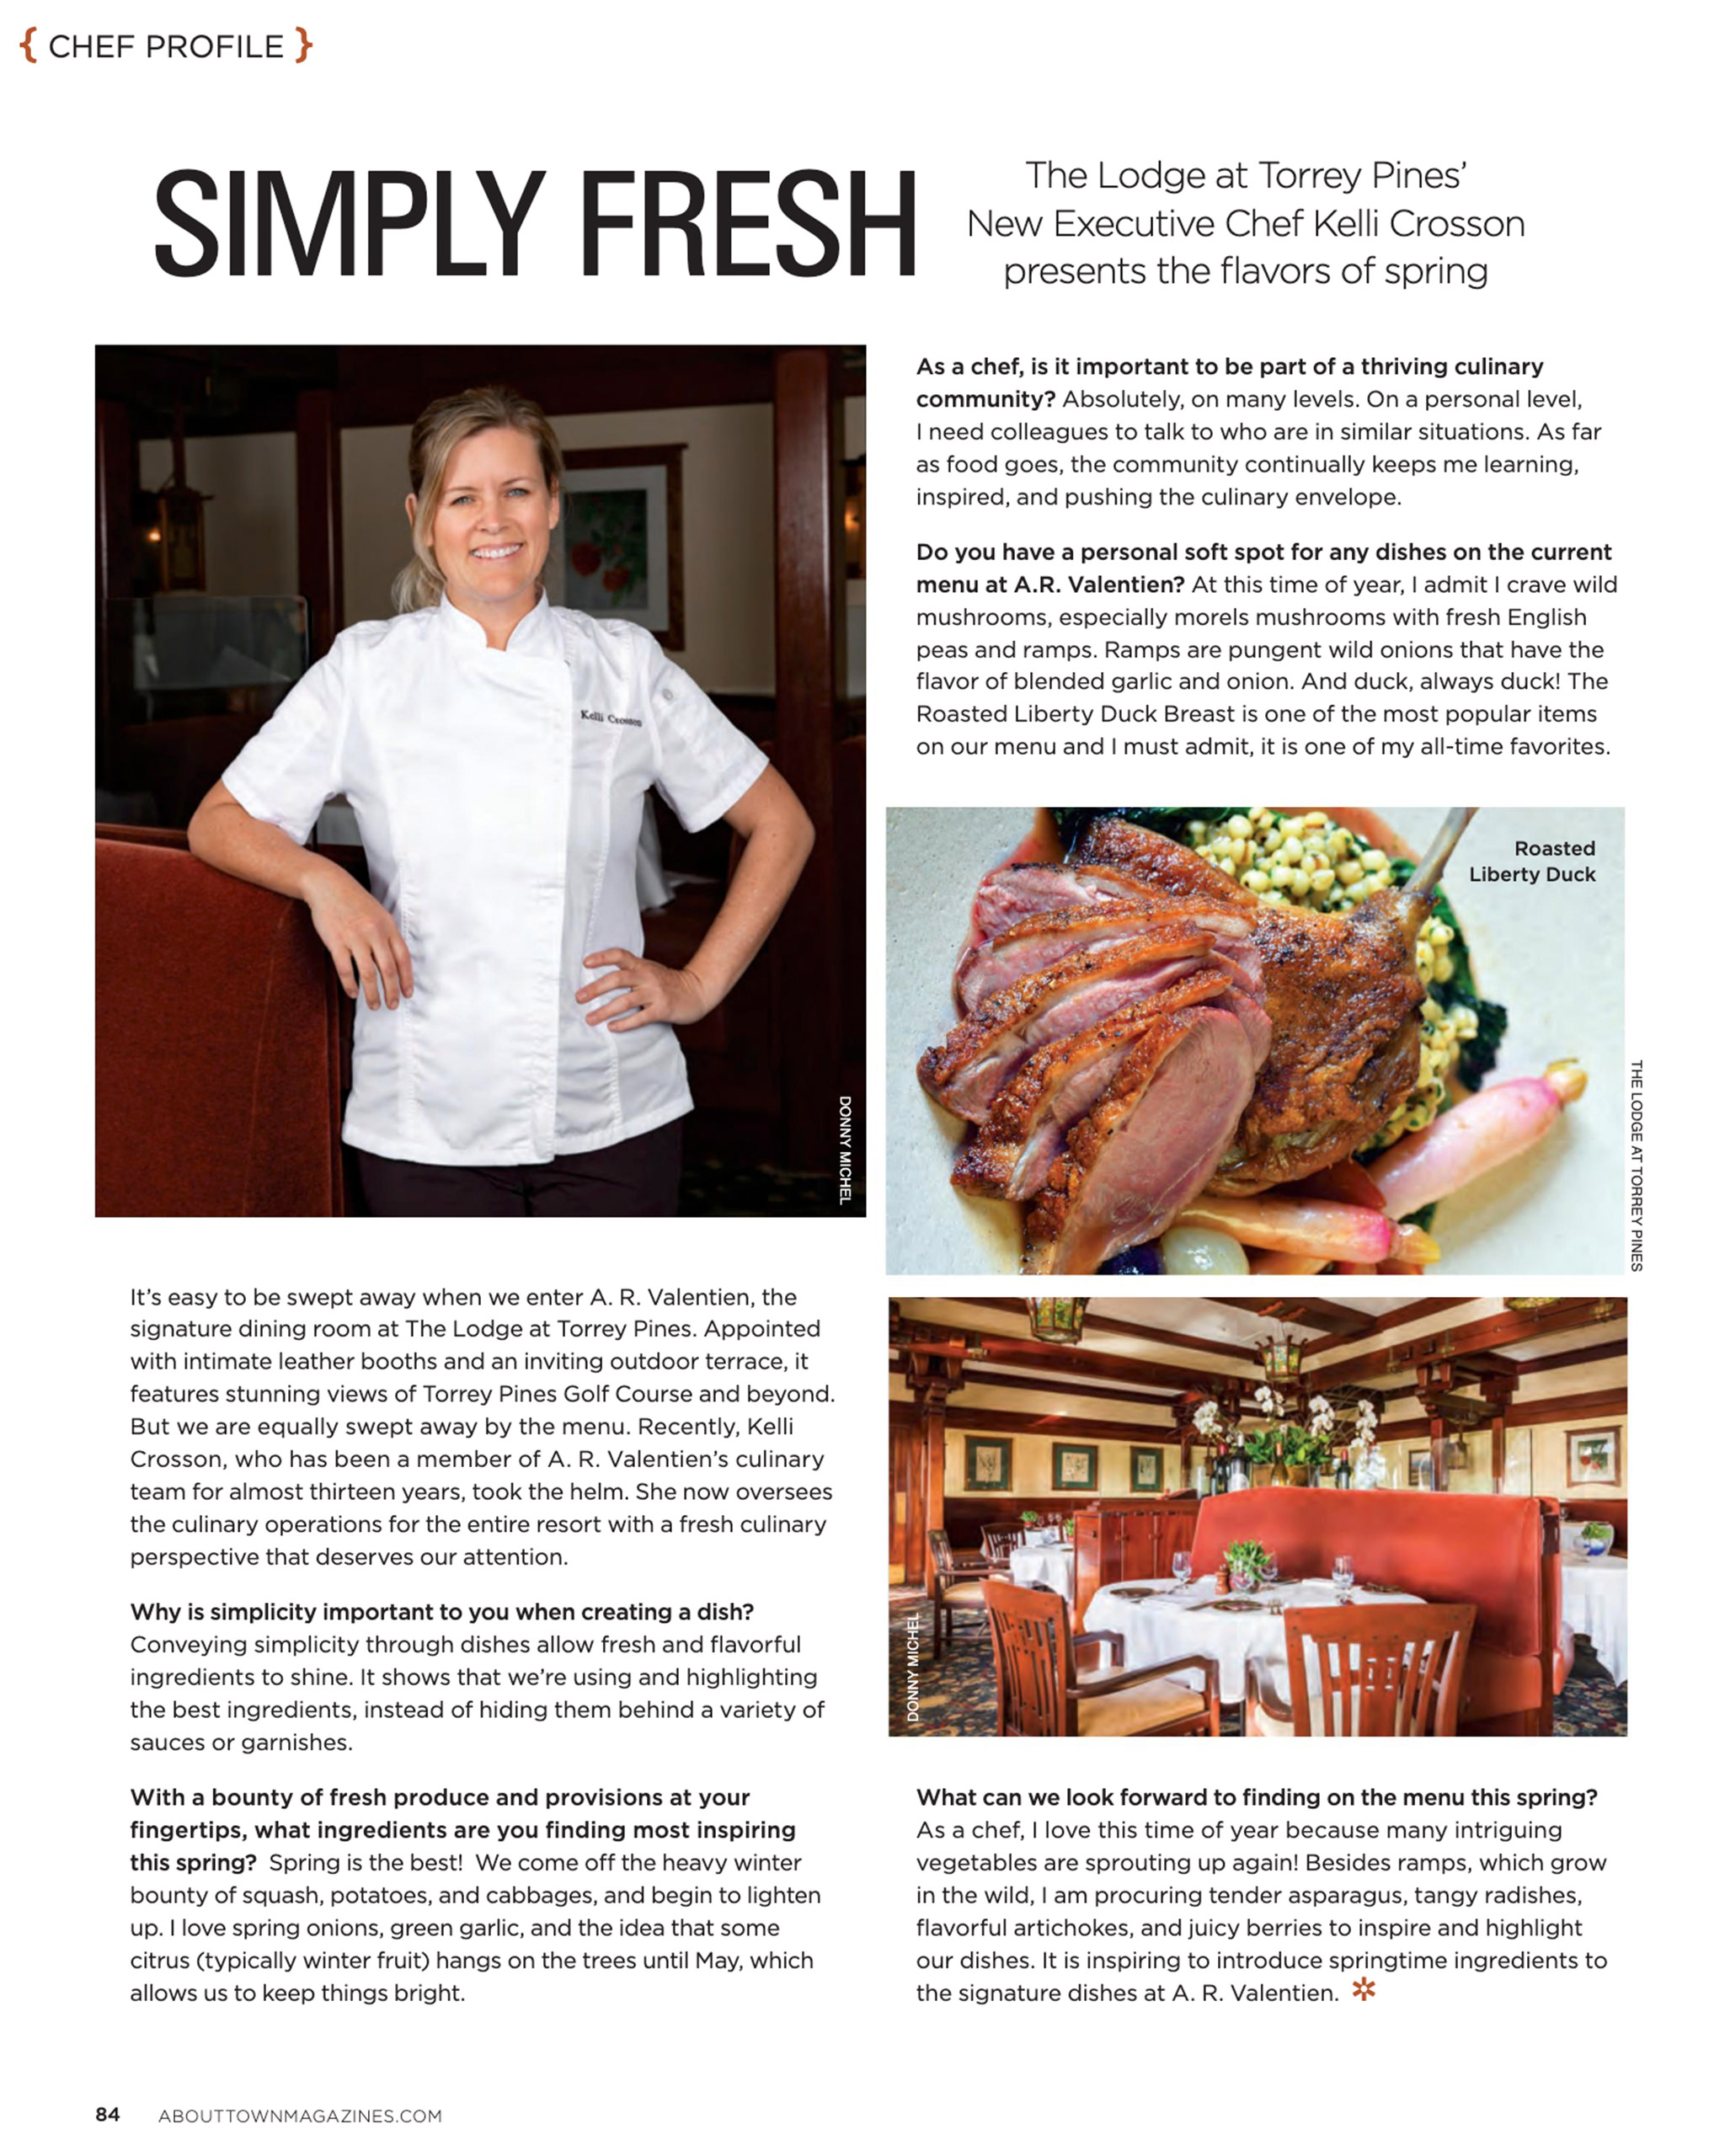 Chef-Kelly-Crosson-A.R. Valentien About Town Magazine